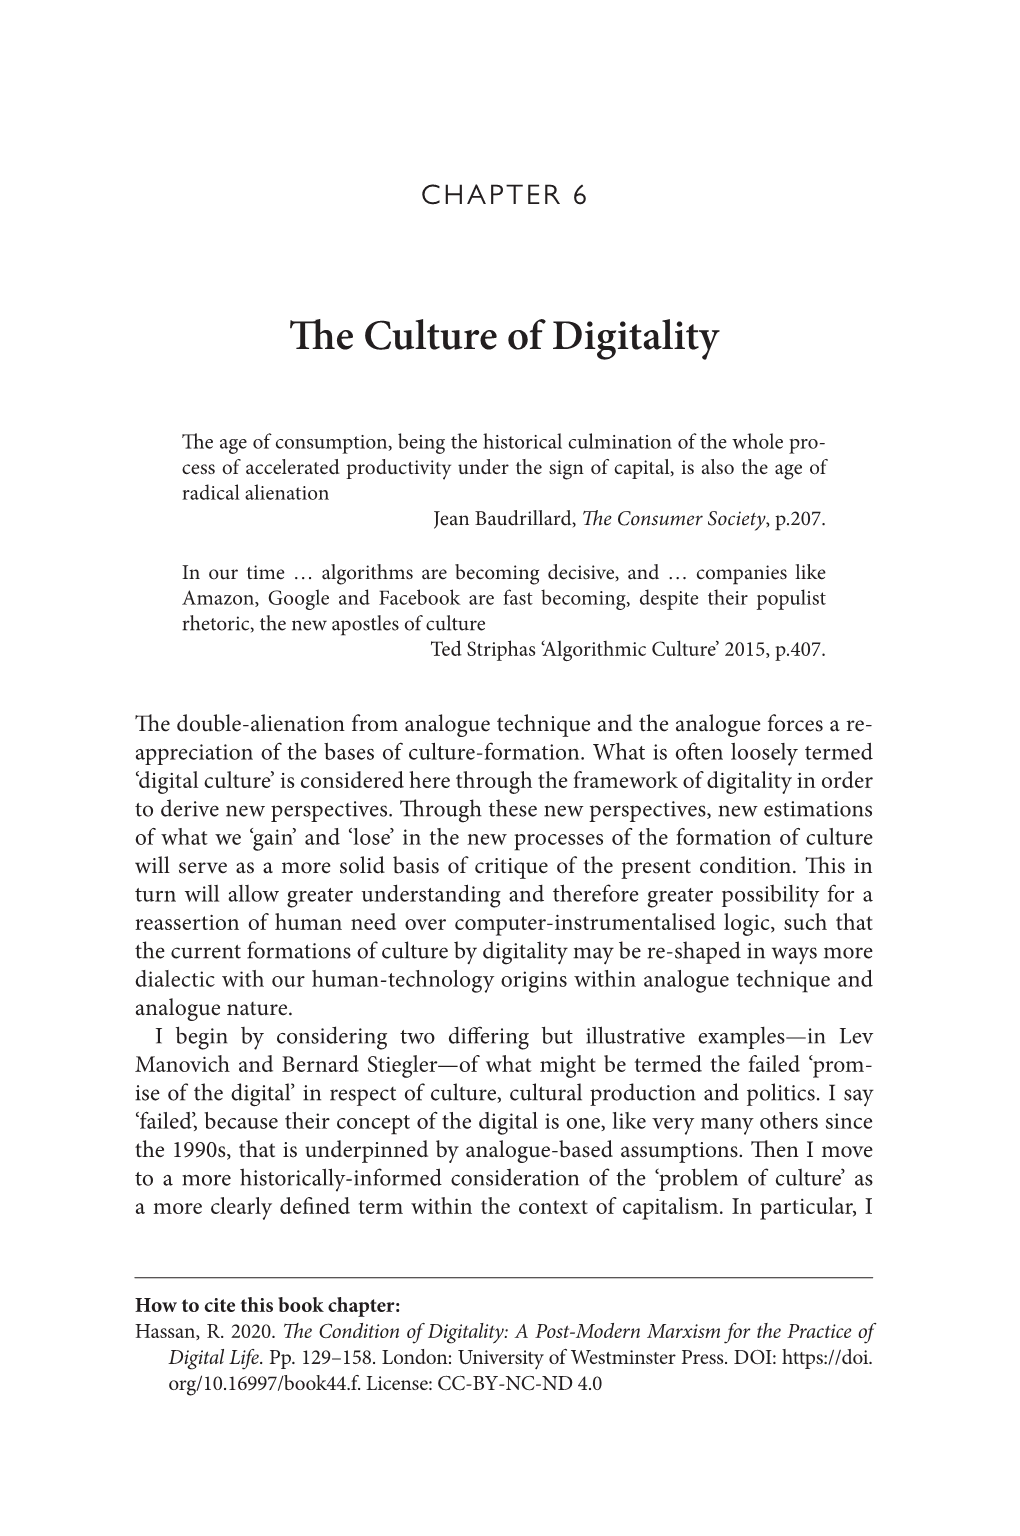 The Condition of Digitality: a Post-Modern Marxism for the Practice of Digital Life